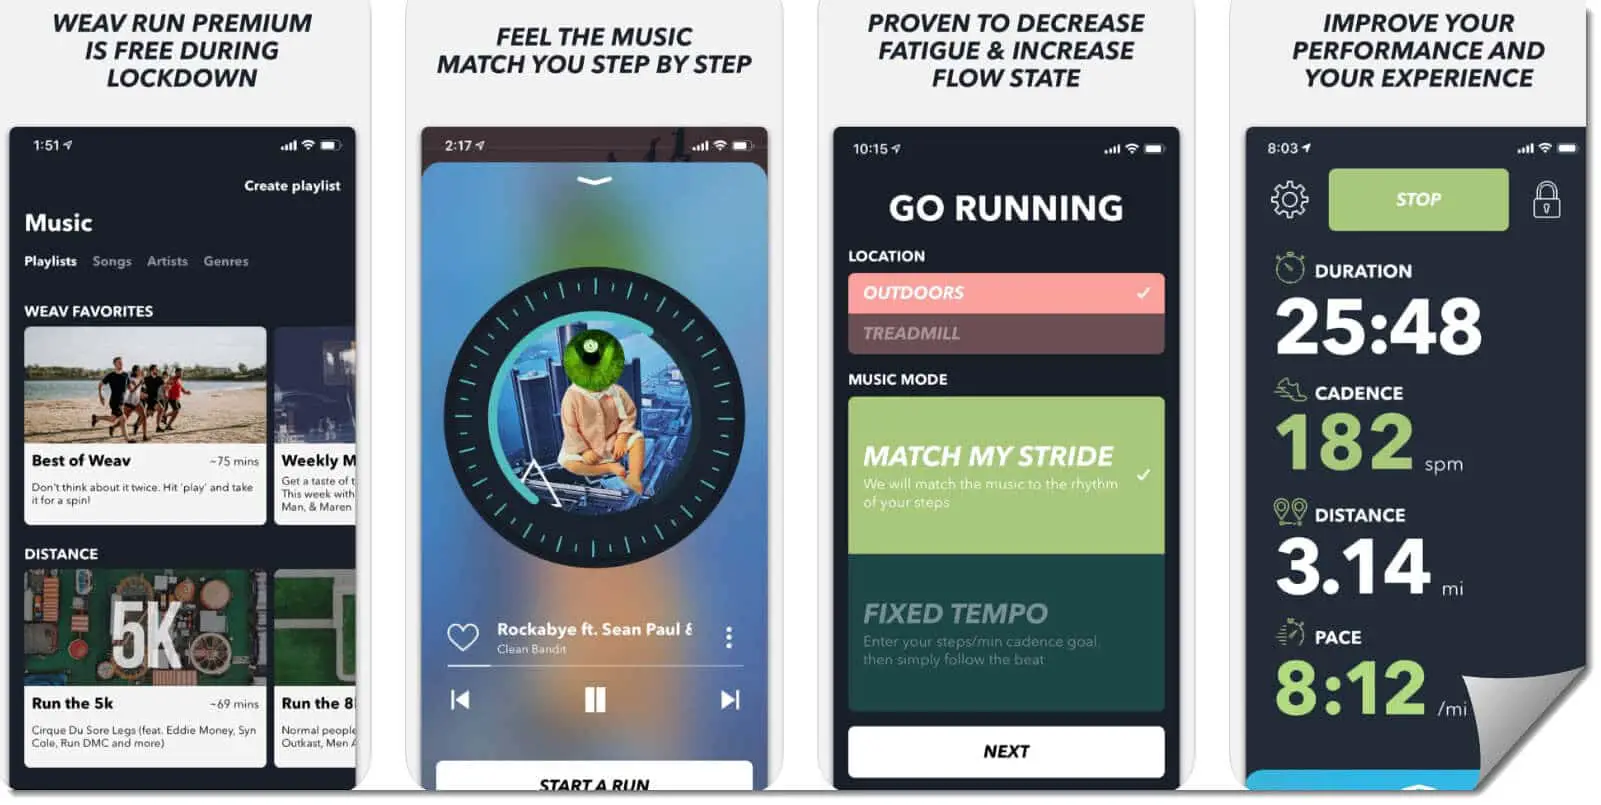 15 Of The Best Running Apps To Stay Fit - Reviewed